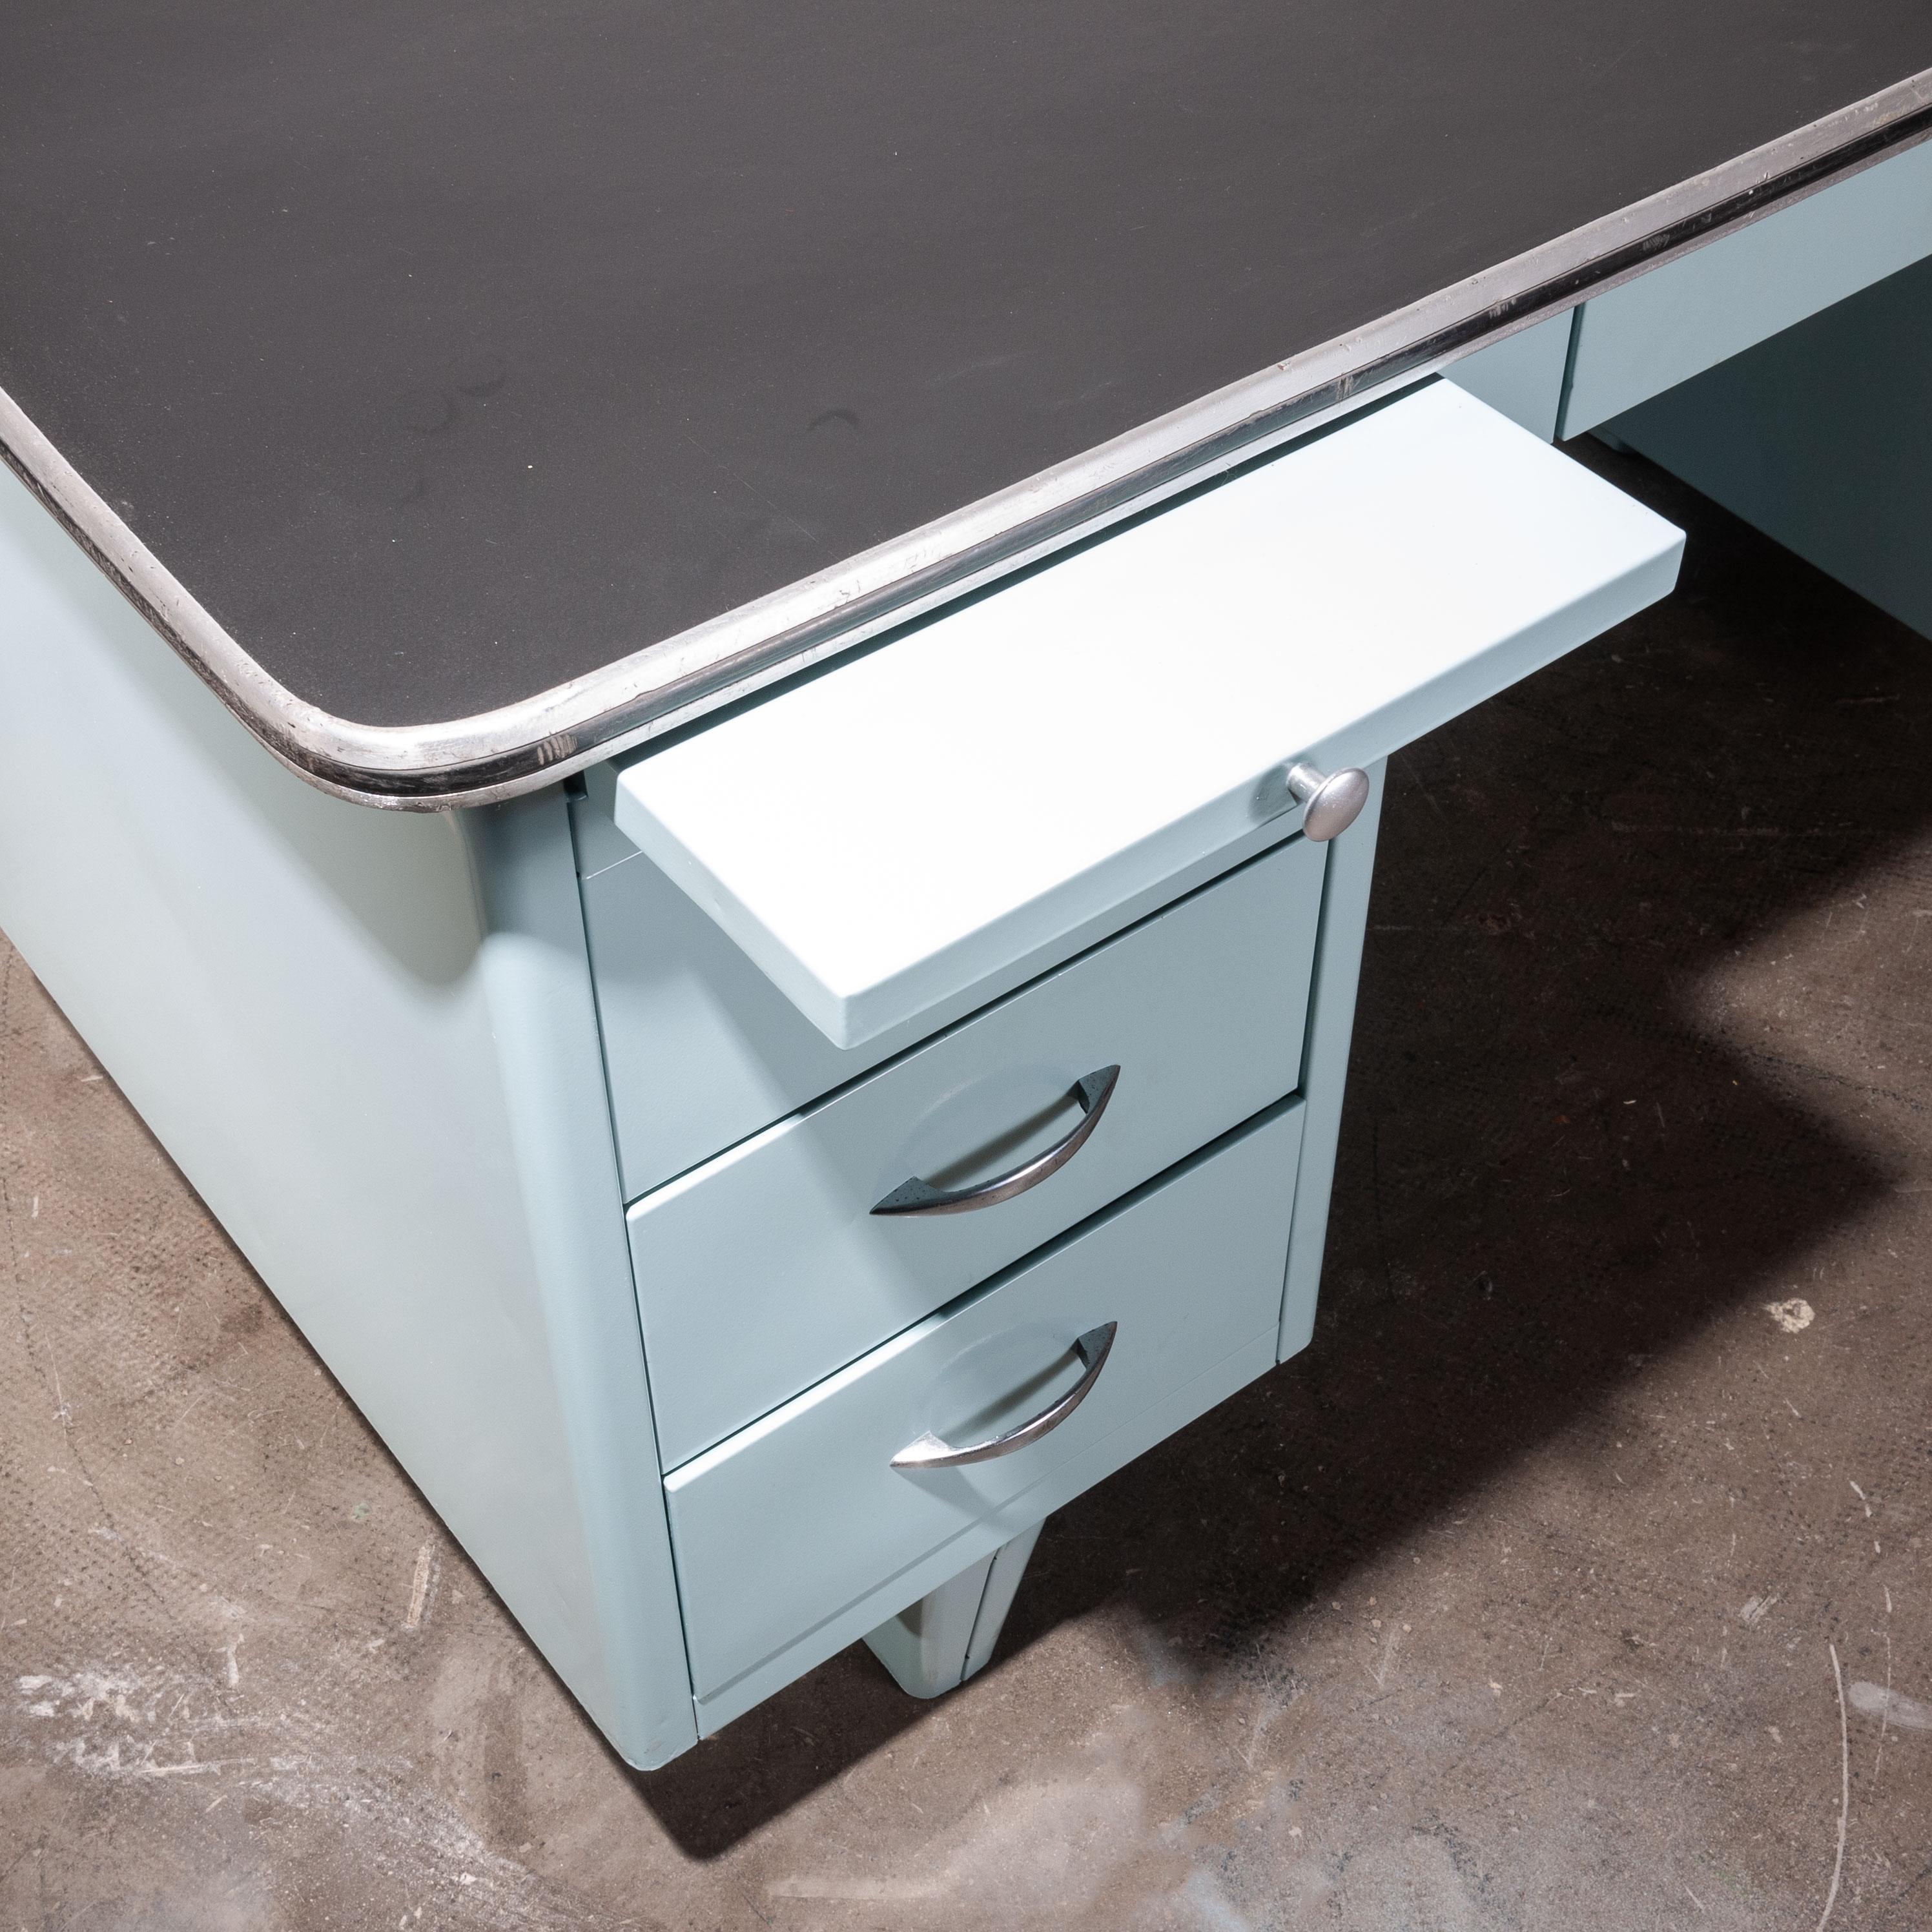 1950s vintage Air Force blue metal desk with Forbo linoleum top. This stunning desk came from the RAF Linton-on-Ouse base in North Yorkshire. After a rather hard life we have restored it to its former glory and fitted a new Forbo linoleum top. We